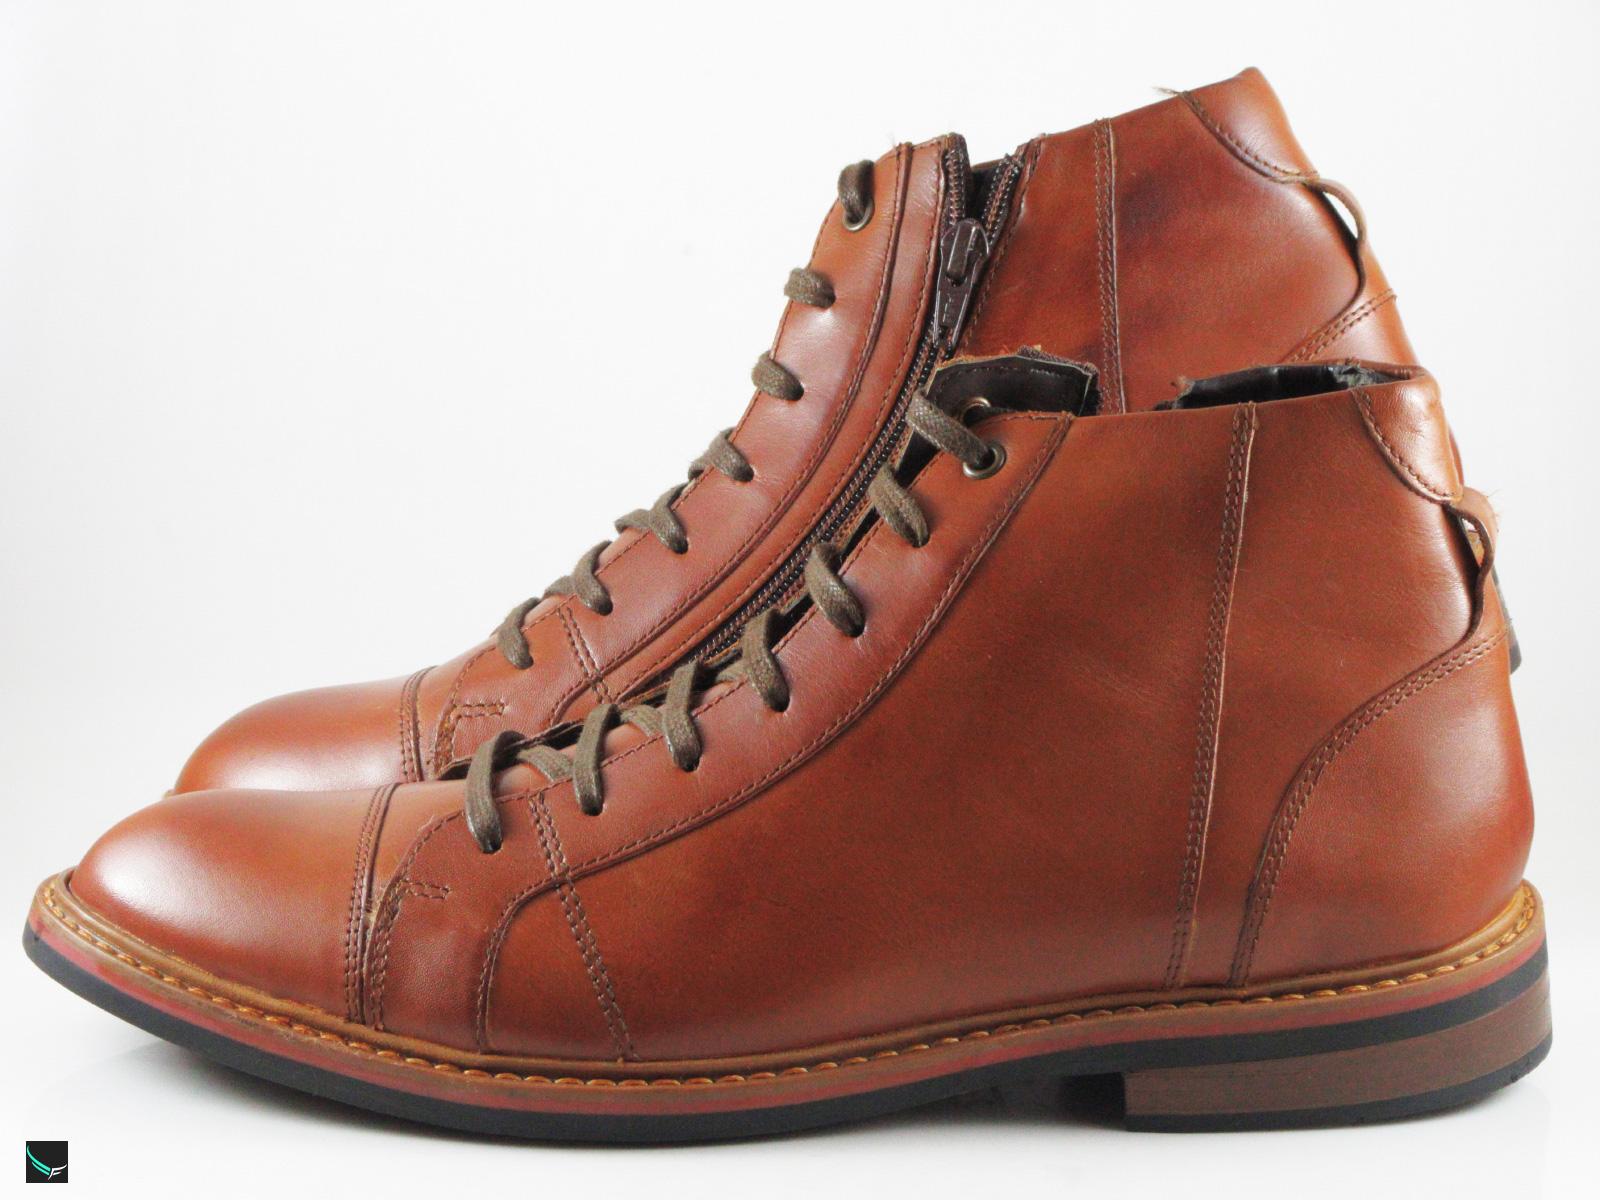 Men's Attractive Trendy Boots - 3797 - Leather Collections On ...